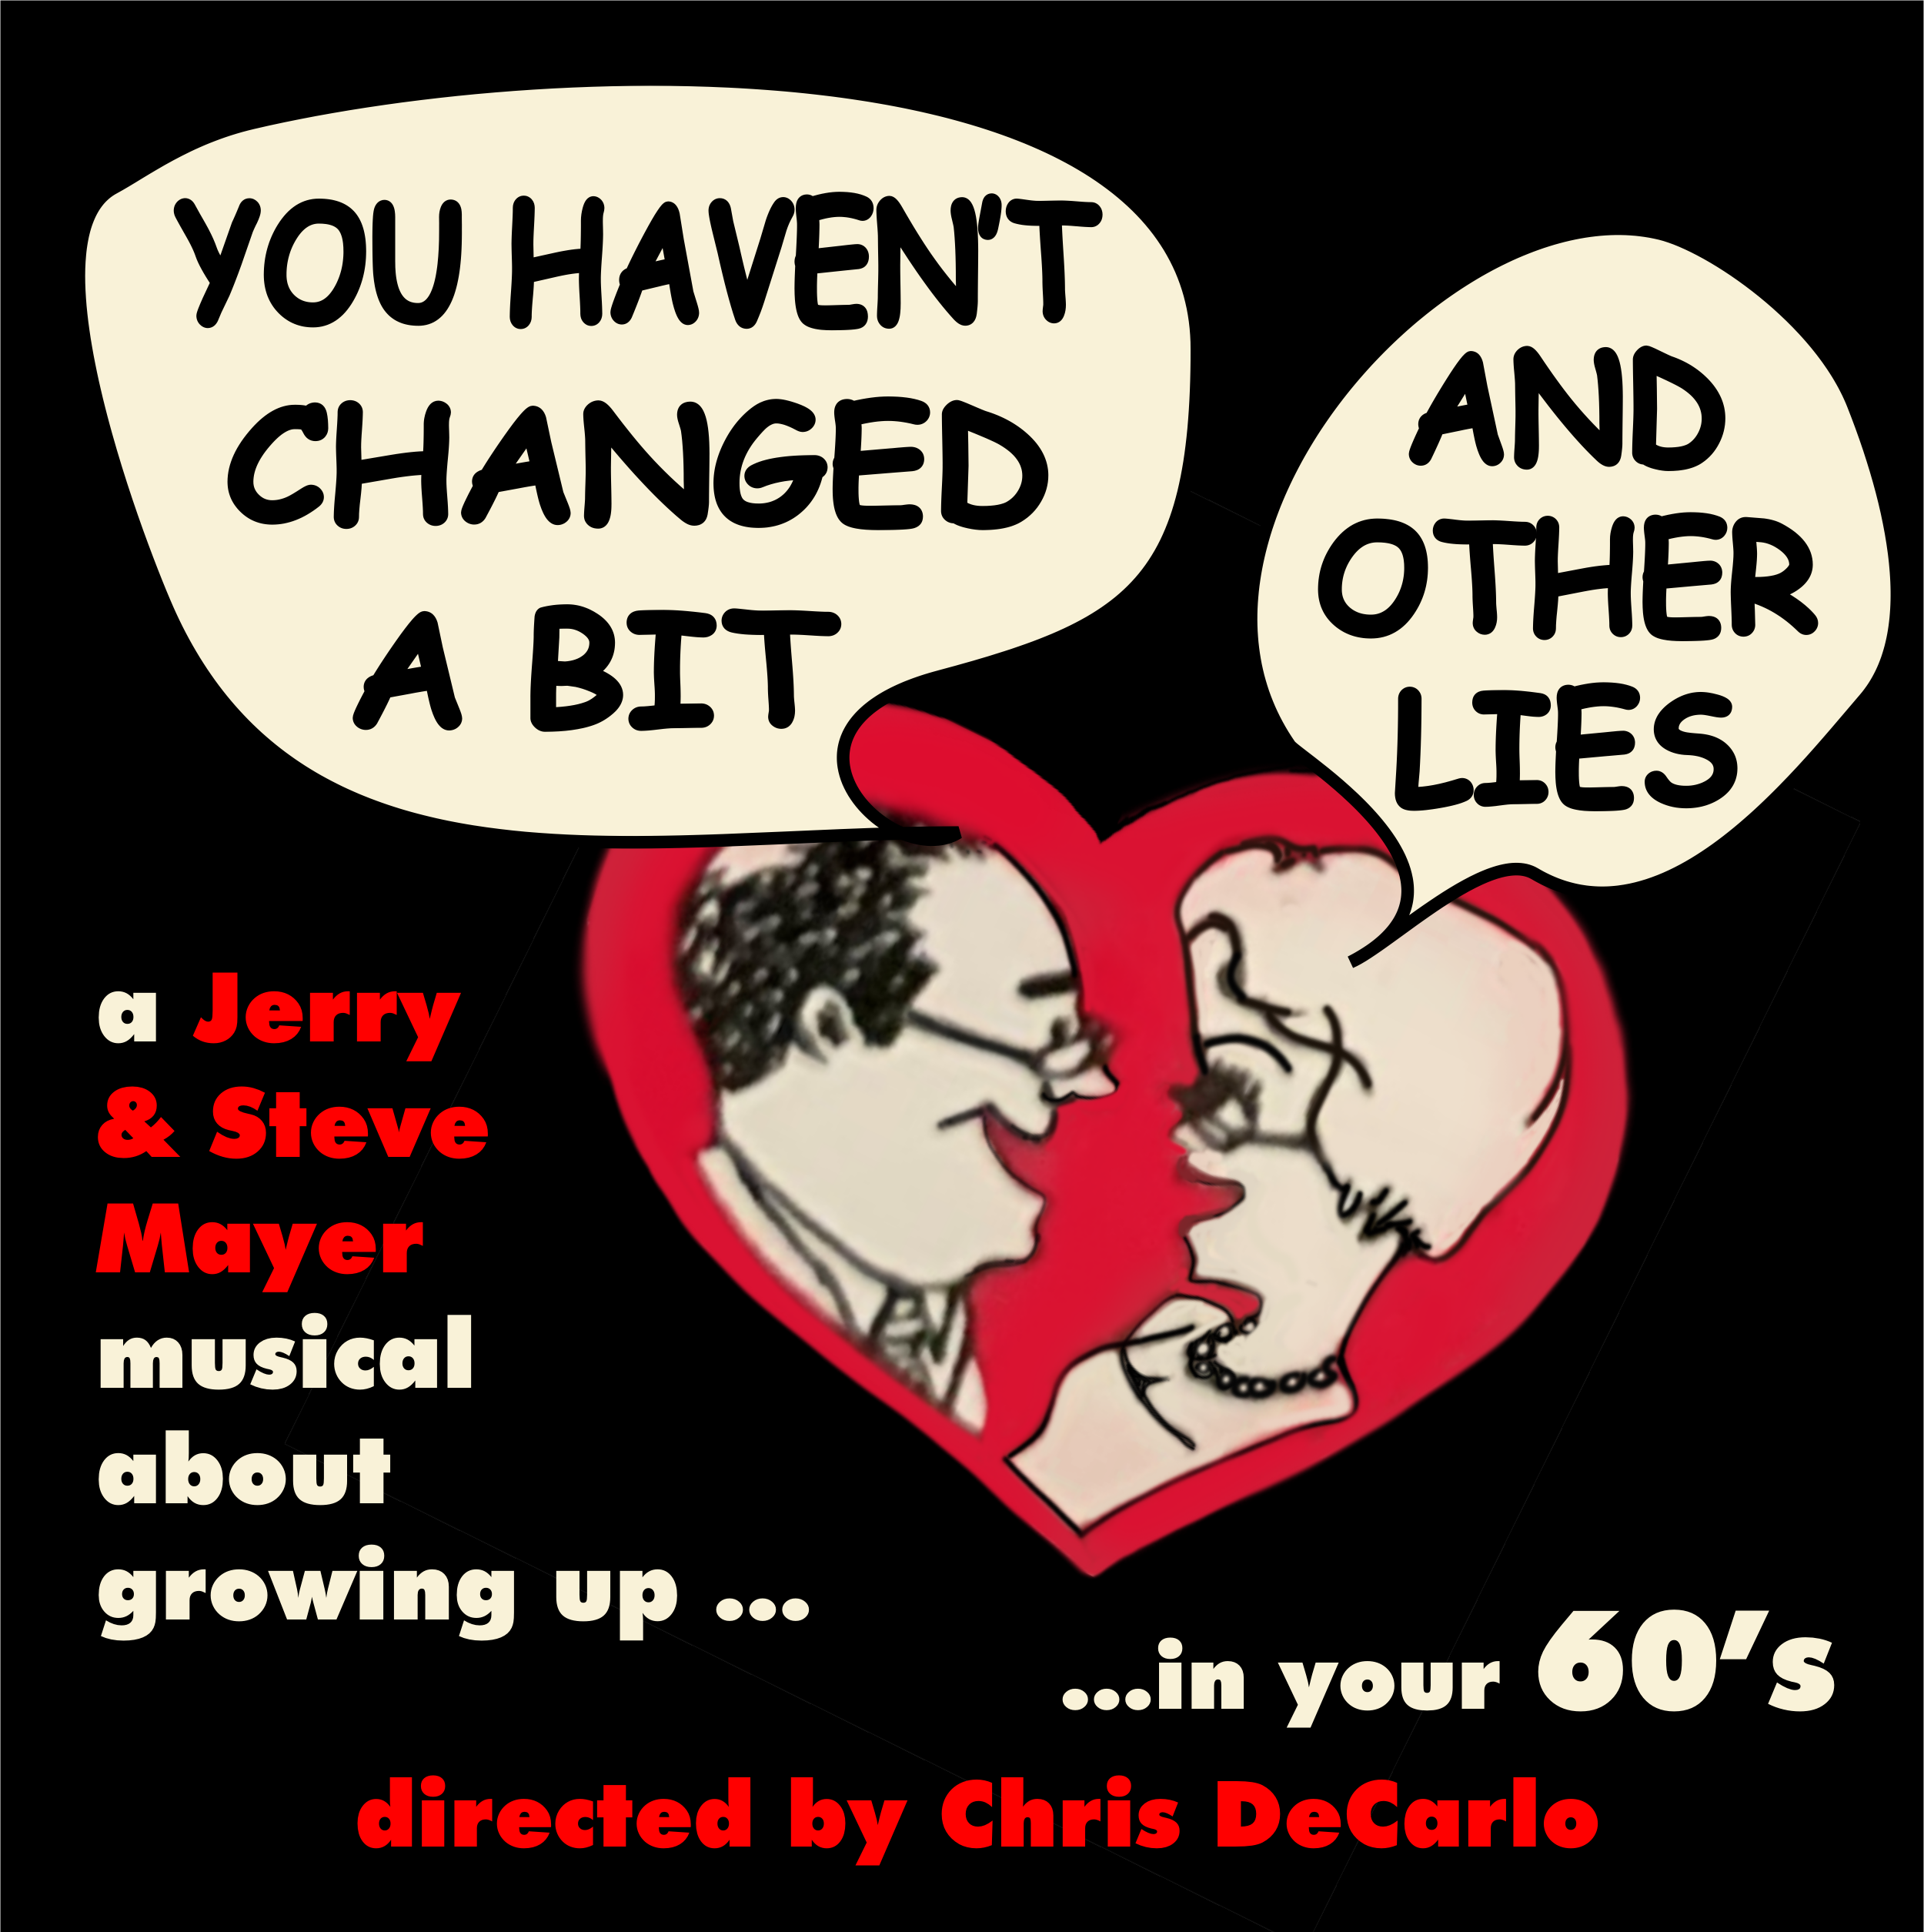 “You Haven’t Changed a Bit and Other Lies” a Jerry Mayer musical